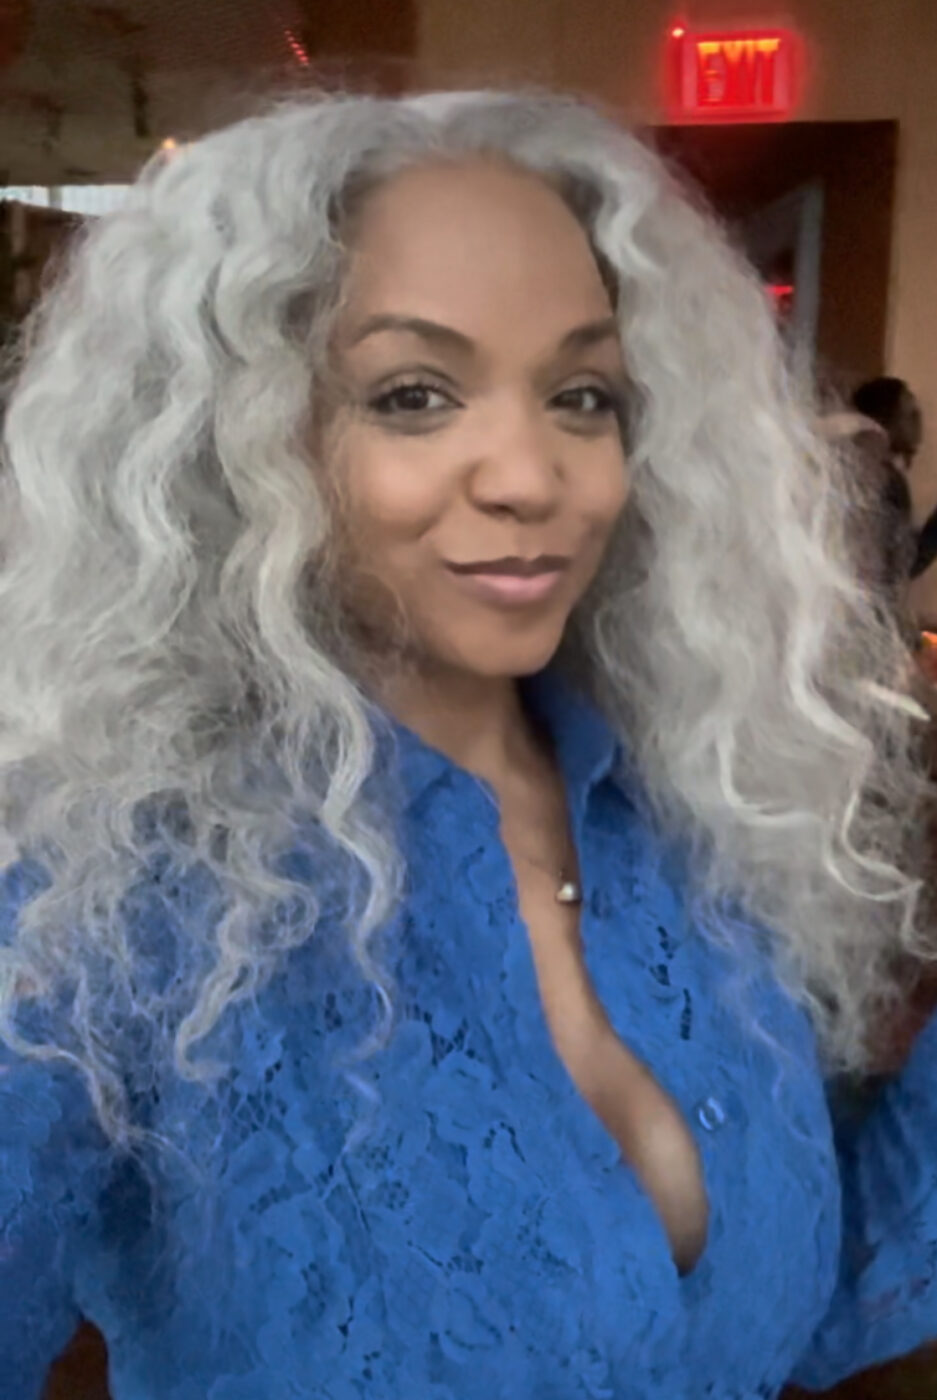 Sinnamon Love is a Black woman with a medium brown complexion, long wavy grey hair, and is wearing a blue lace dress with buttons and an open collar.